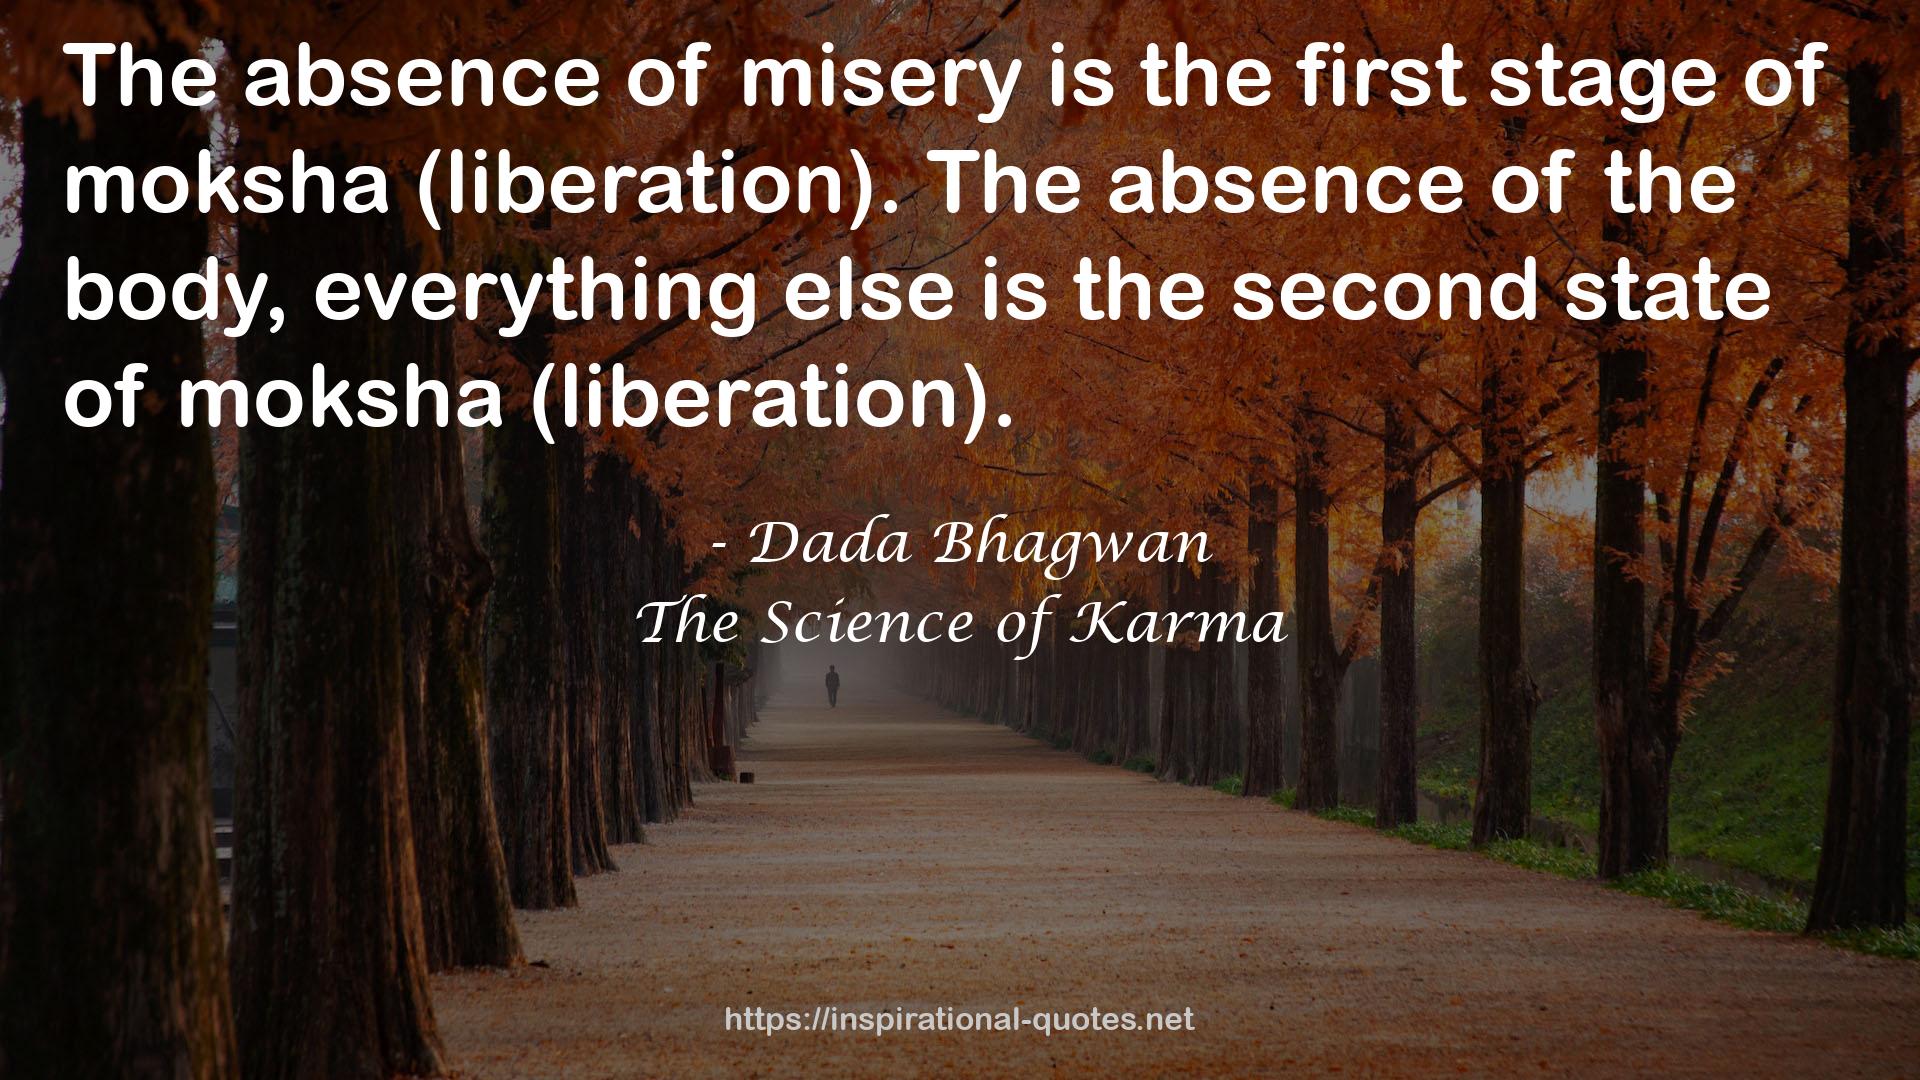 The Science of Karma QUOTES